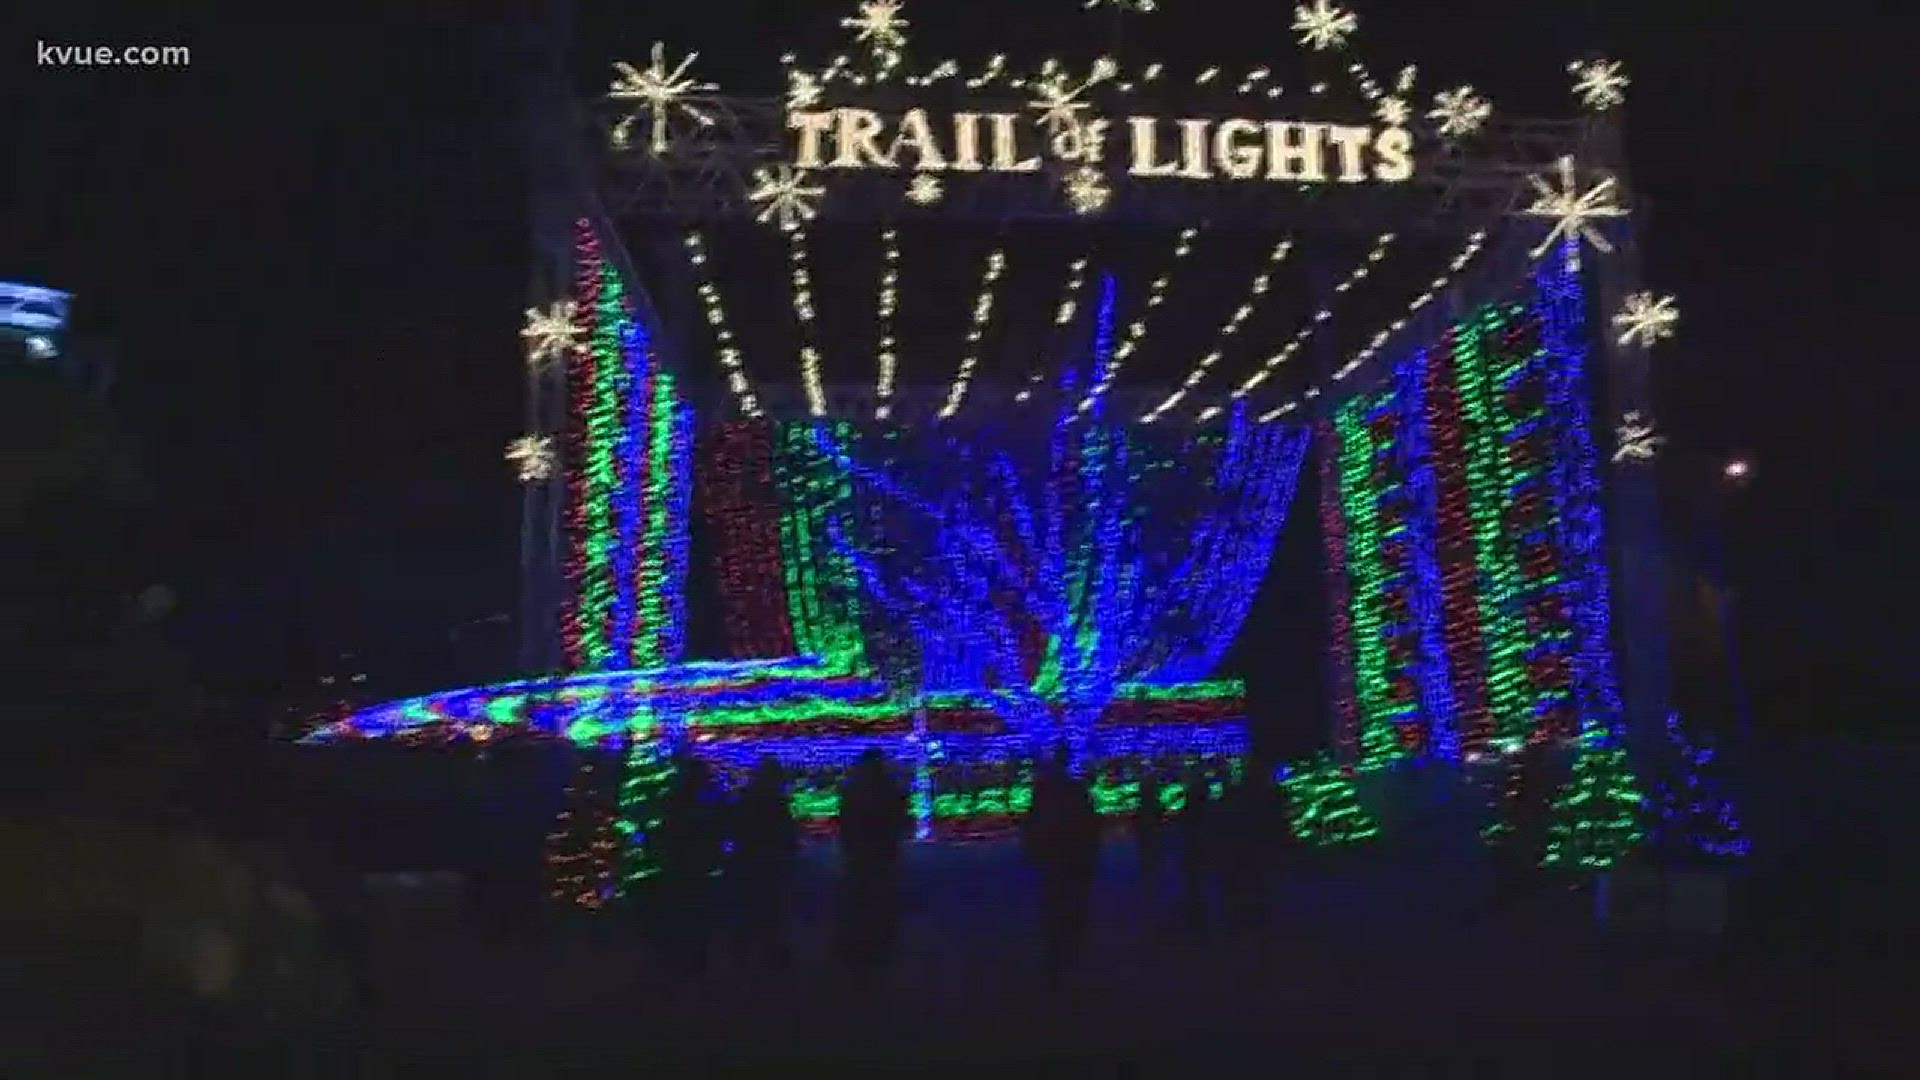 Tonight, thousands of people are expected to head to Zilker Park for a preview party for this year's trail of lights. But for the rest of us, the trail is set to open tomorrow at 7 o'clock.